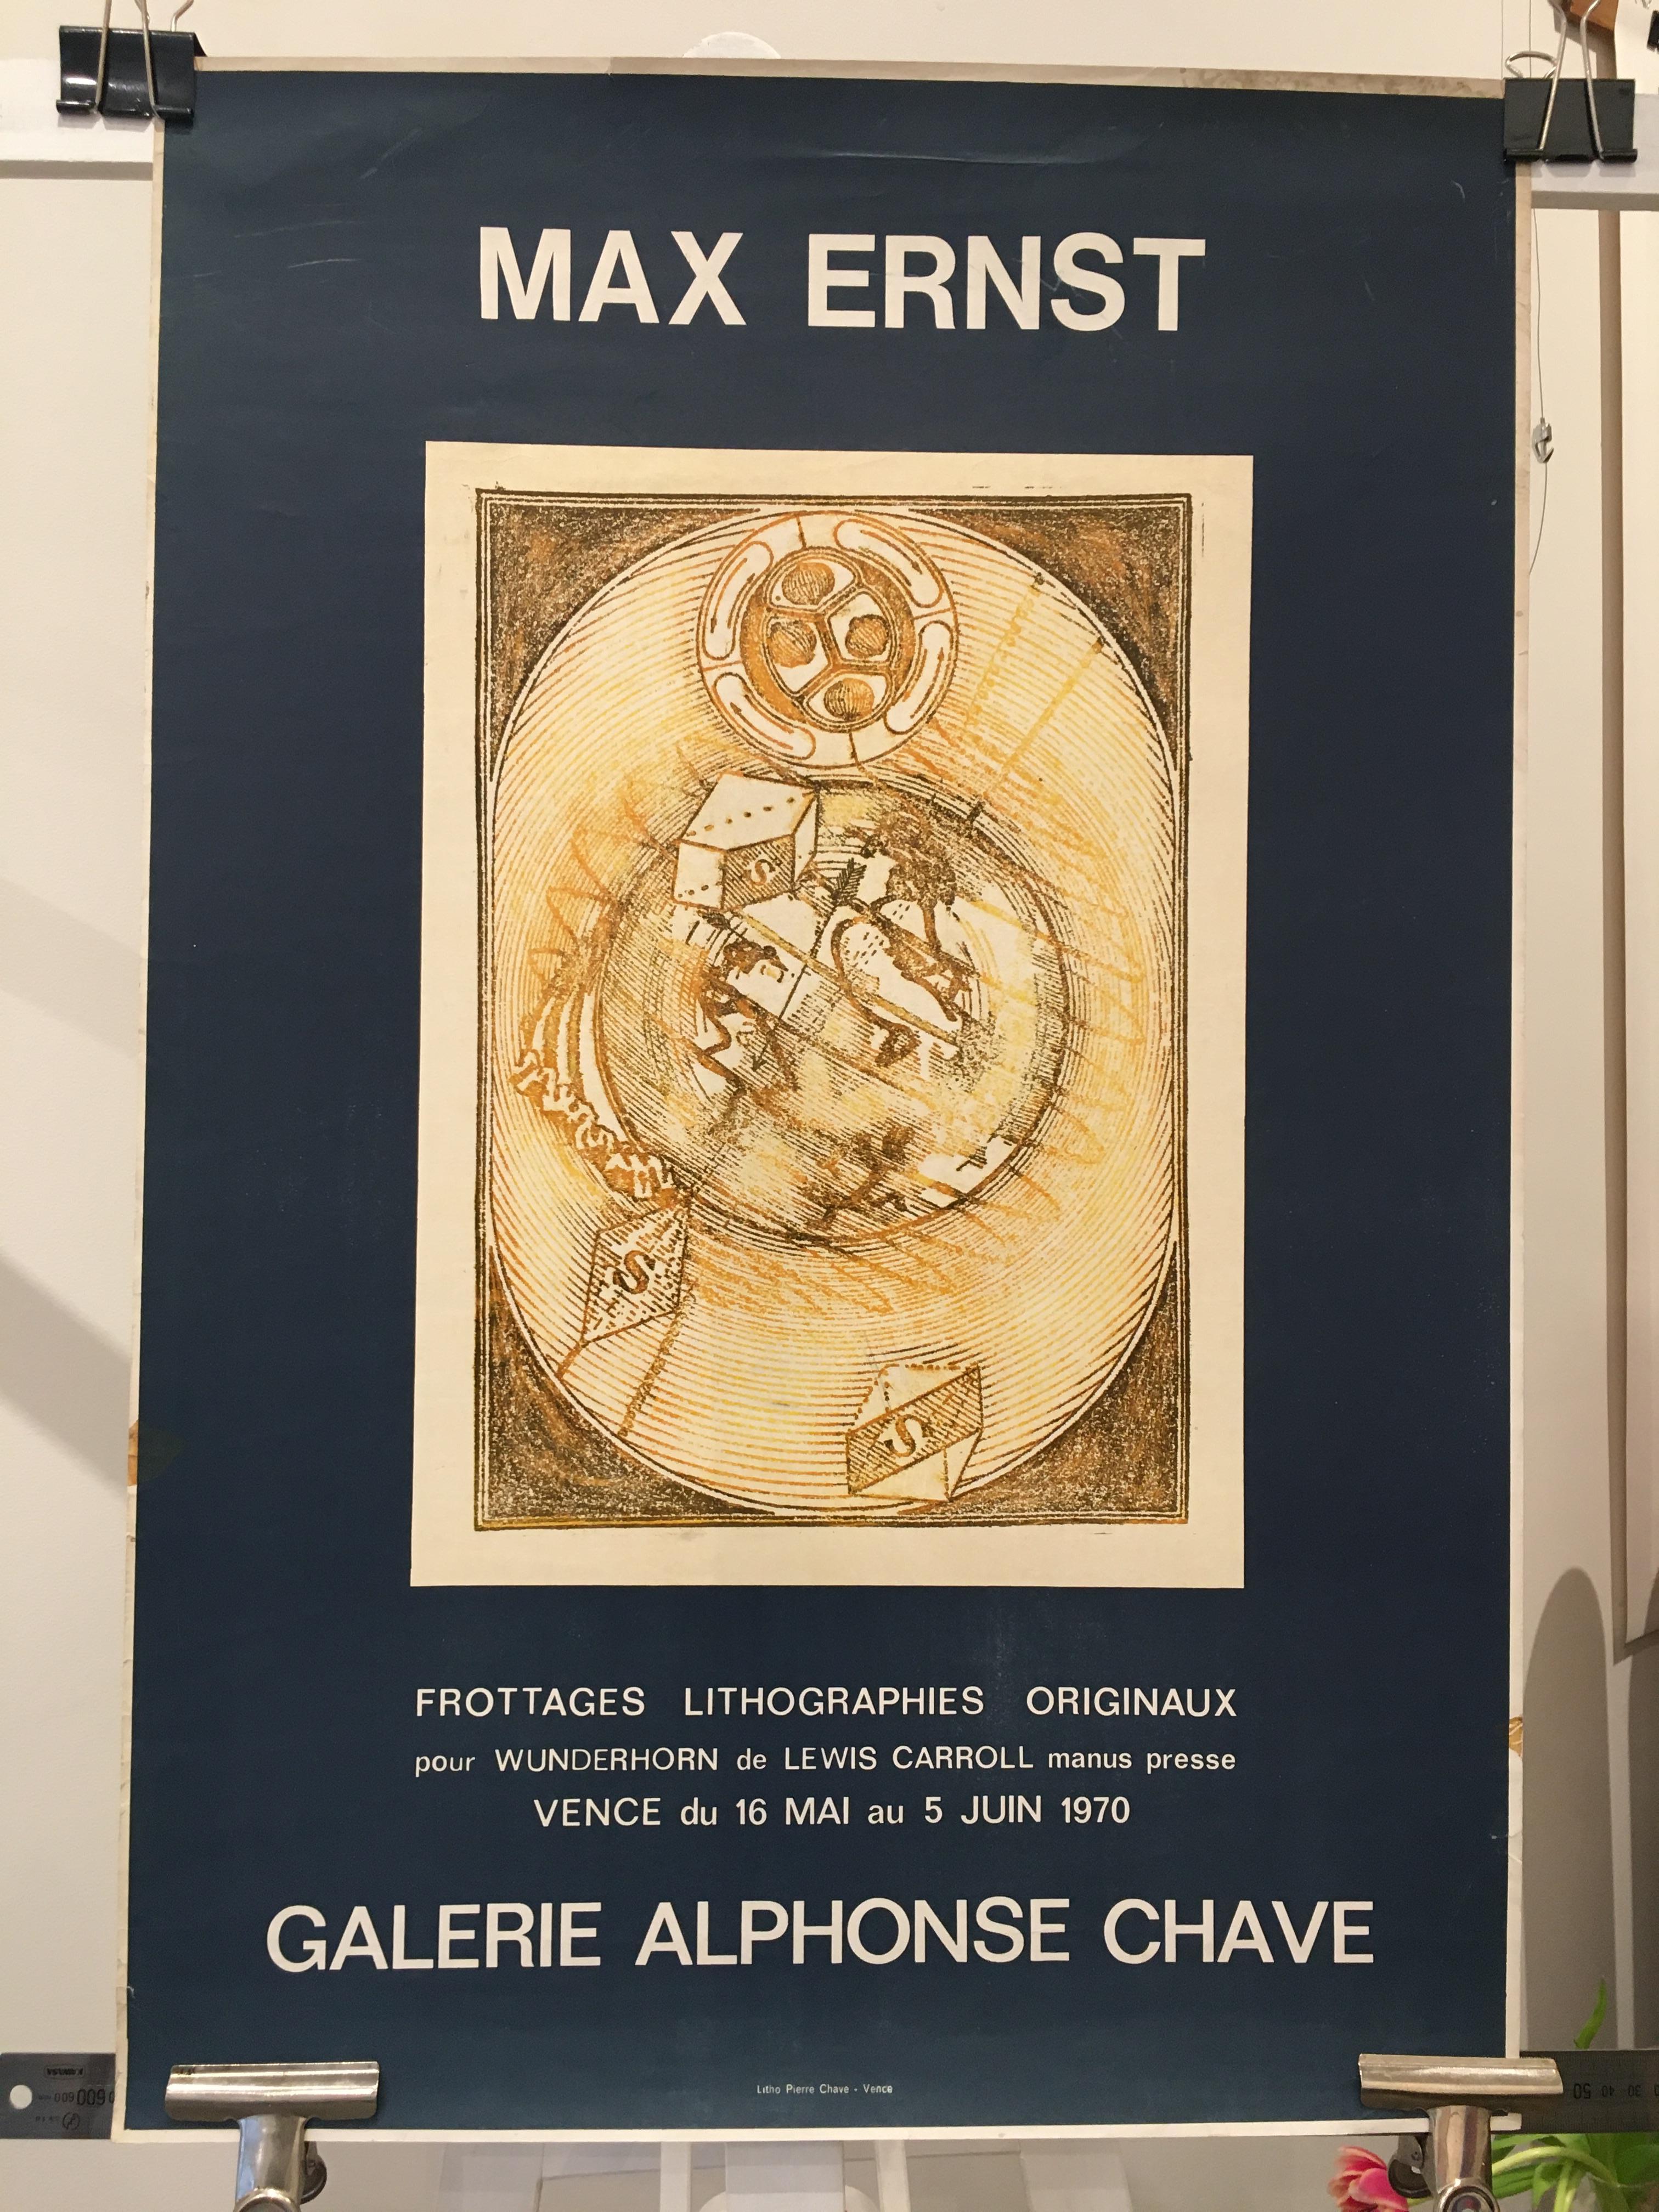 Late 20th Century Original Vintage Art Exhibition Poster MAX ERNST, 1970 Galerie Alphonse Chave For Sale